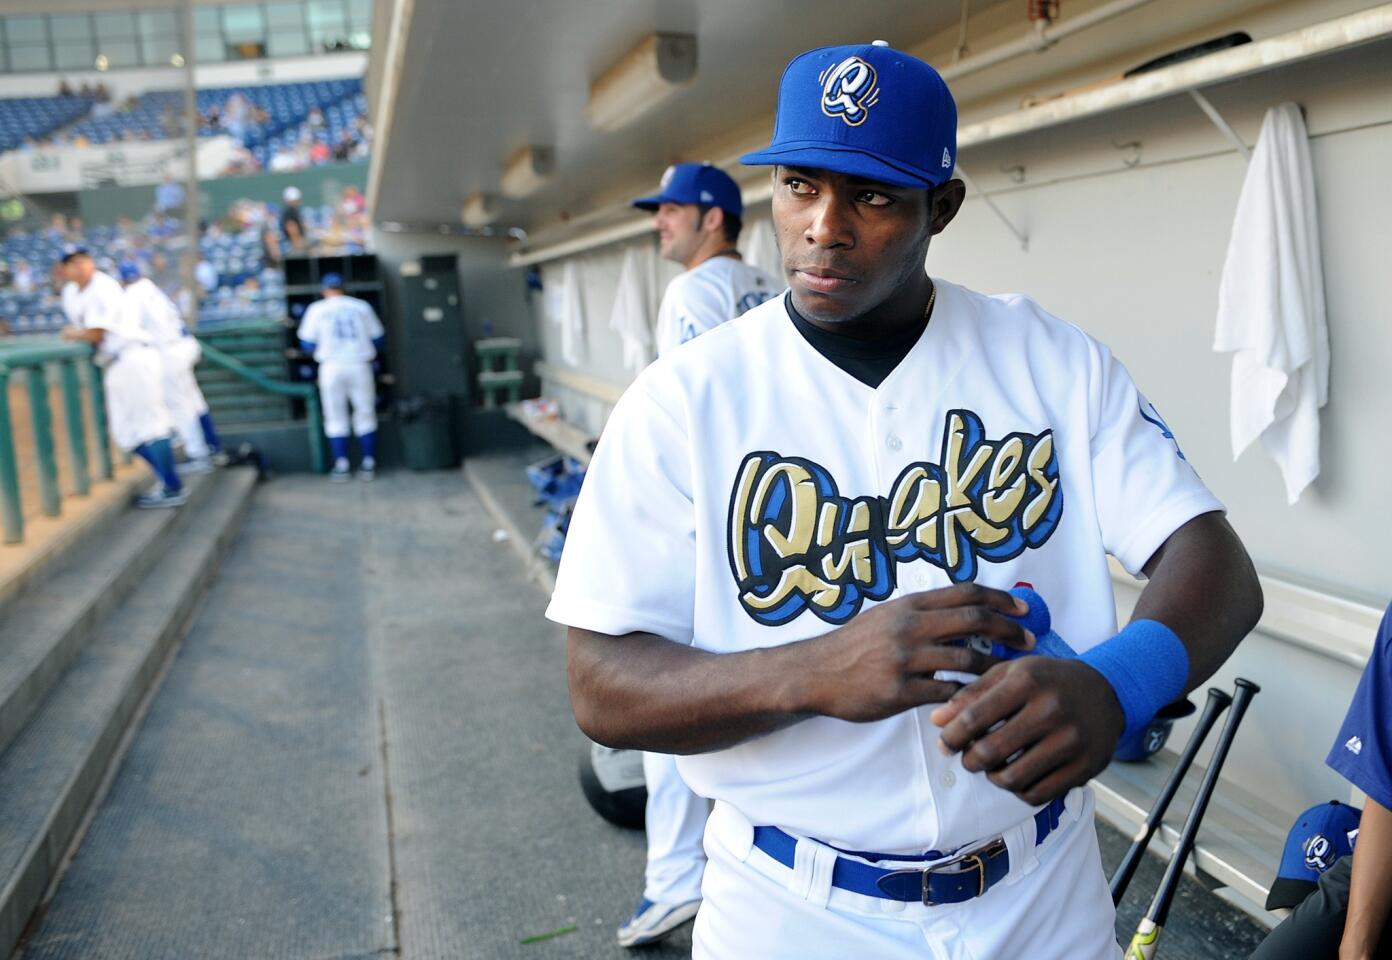 The Dodgers' Yasiel Puig tapes his wrists before a game. His journey to Los Angeles is a serpentine tale of drug cartels, nighttime escapes and international human smuggling.